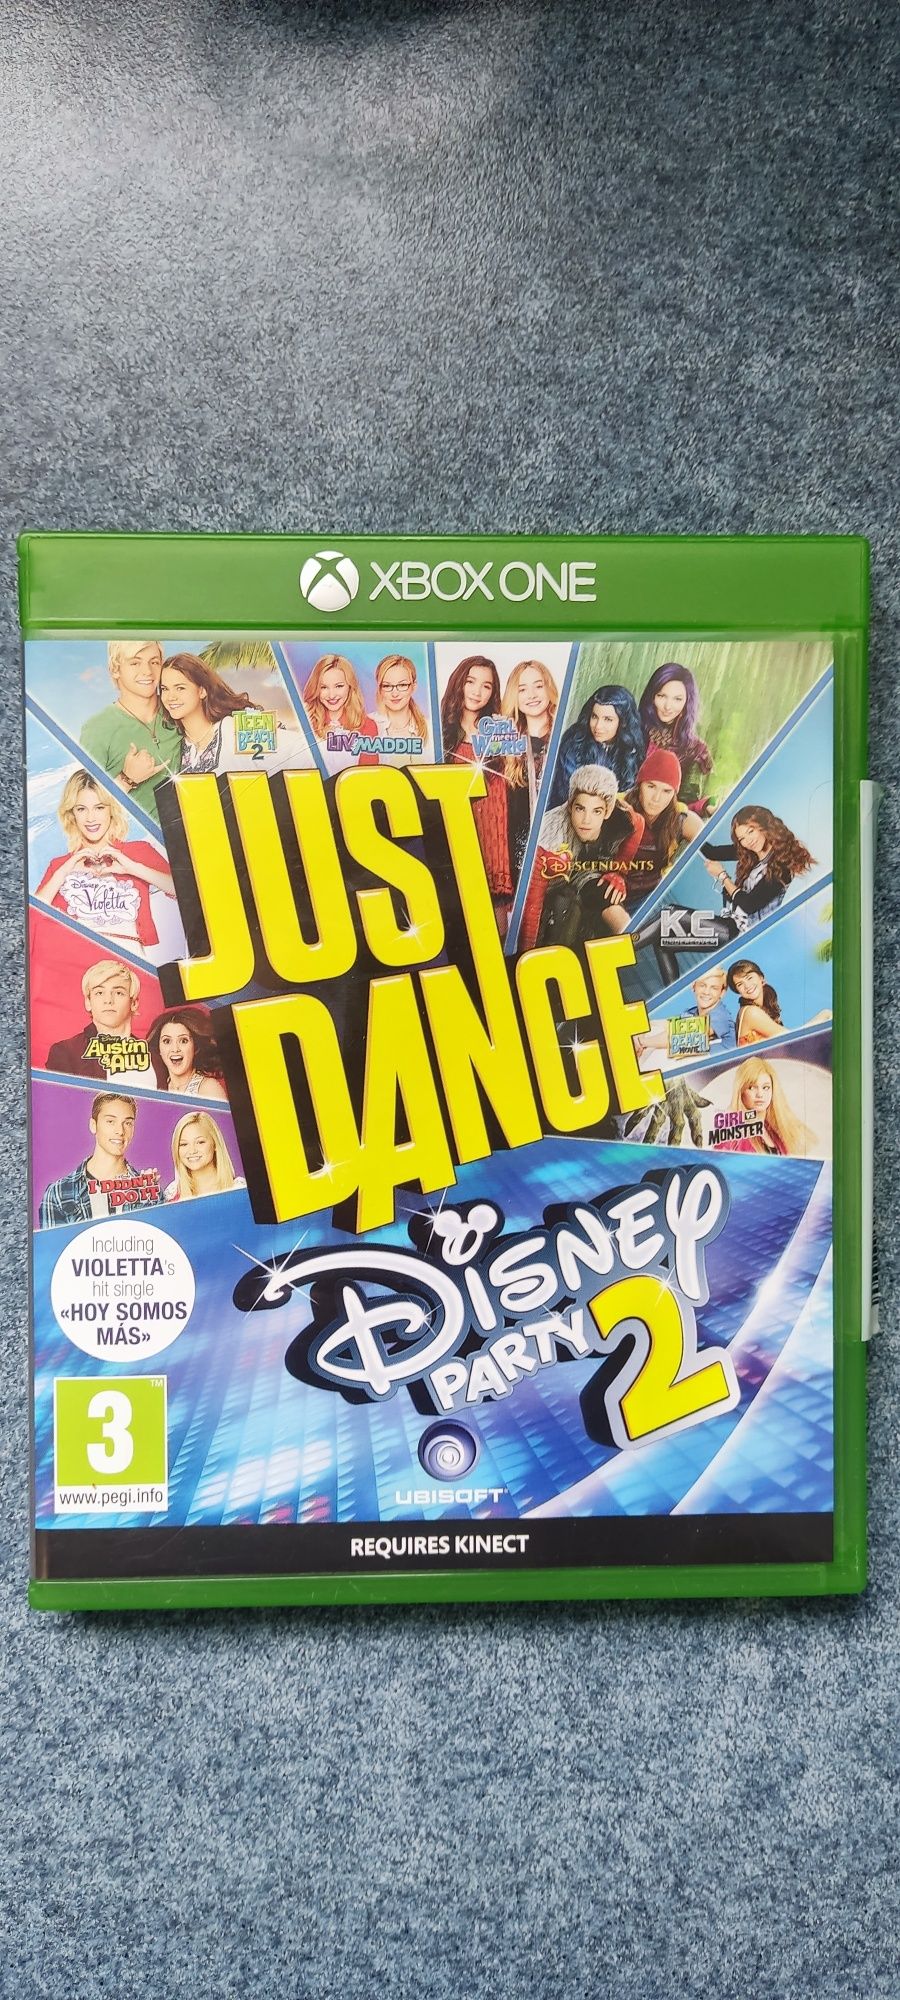 Just dance party 2 xbox one